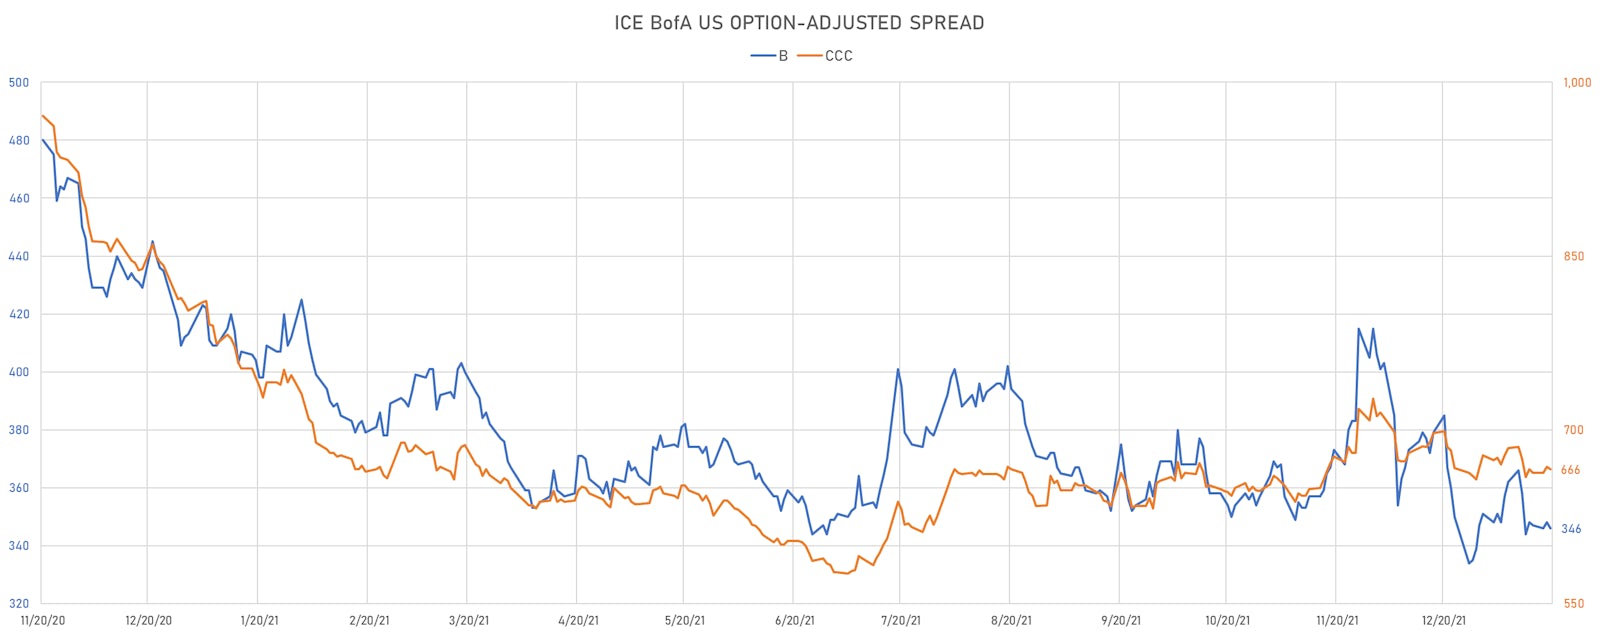 ICE BofAML US Corporate OAS For Single-Bs & CCCs | Sources: ϕpost, Refinitiv data